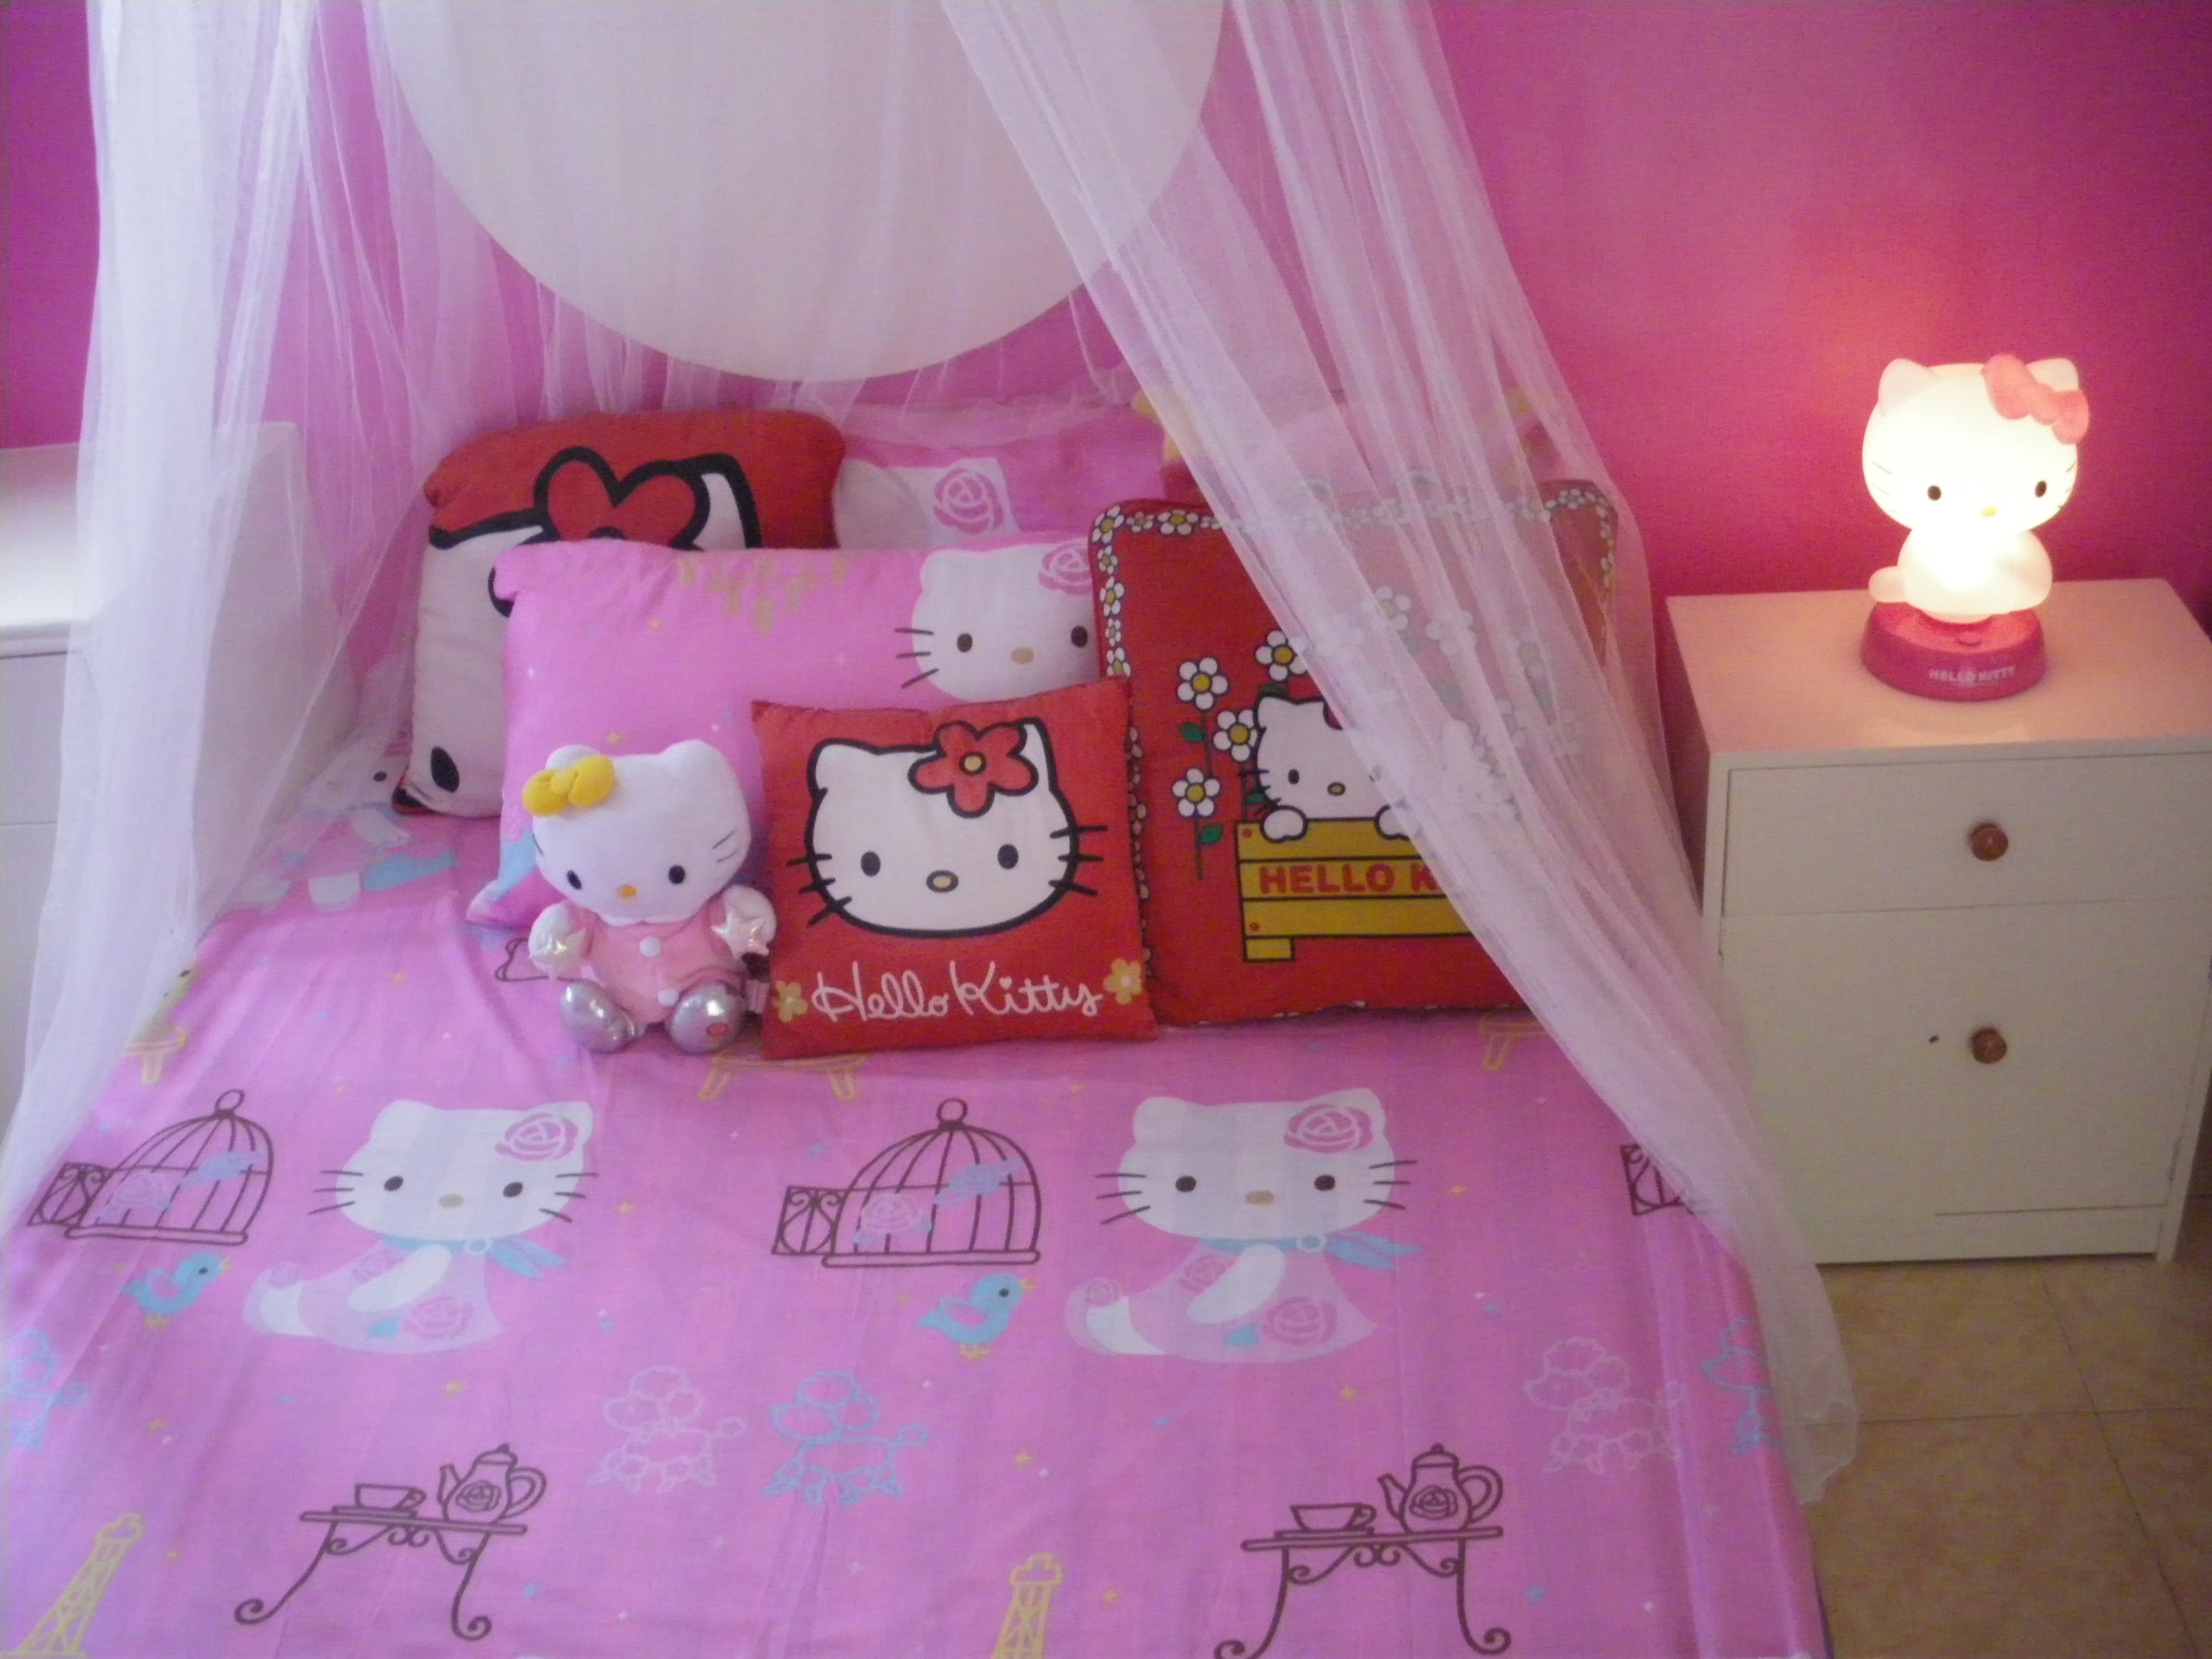 wallpaper kamar hello kitty,pink,product,bed,bed sheet,bedding